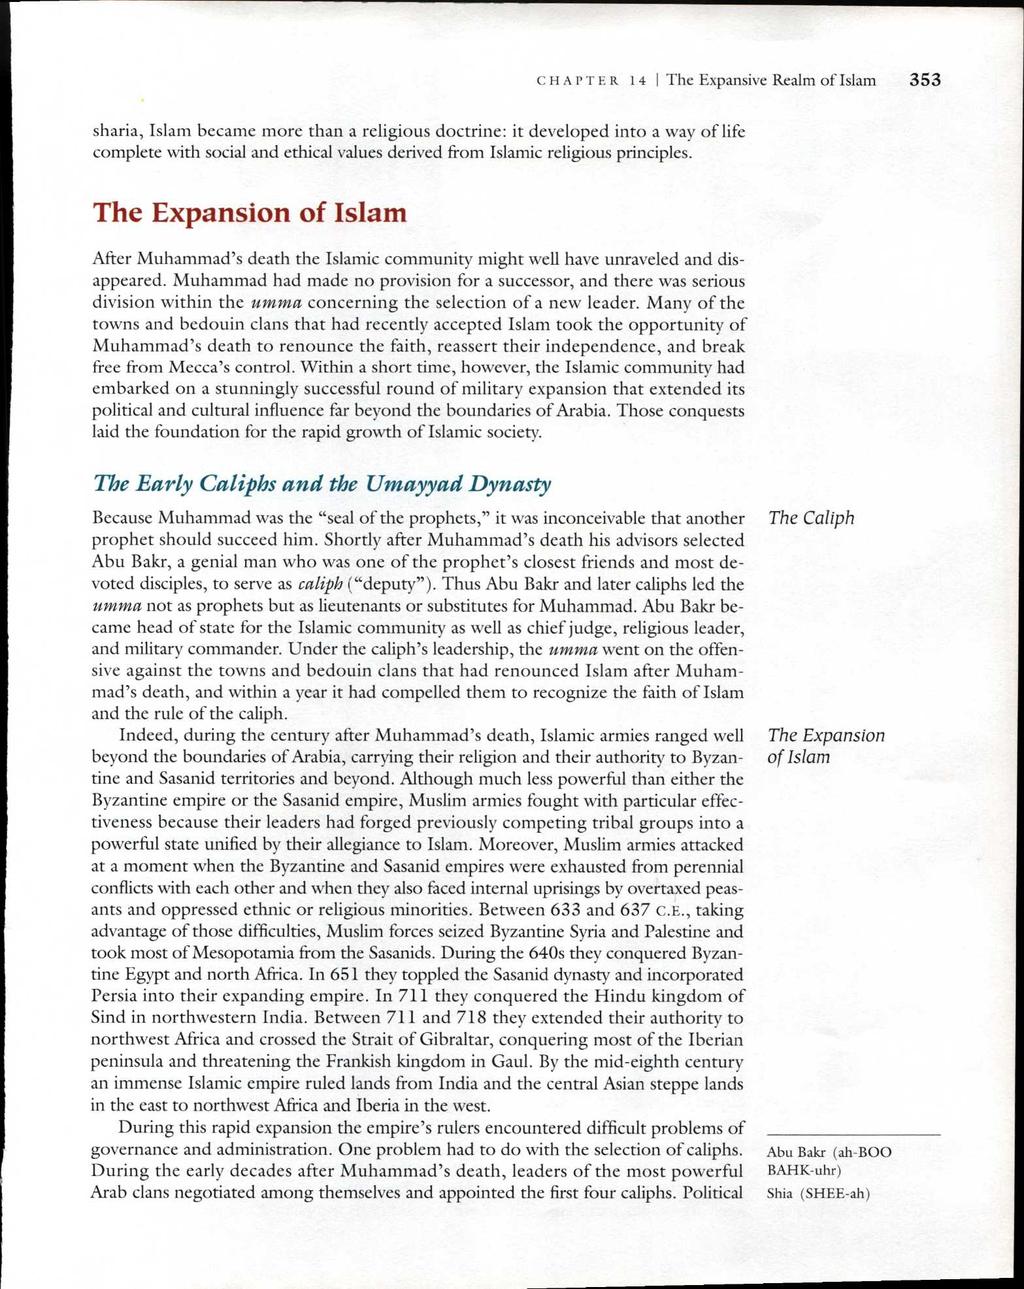 CHAPTER 14 I The Expansive Realm of Islam 353 sharia, Islam became more than a religious doctrine: it developed into a way of life complete with social and ethical values derived from Islamic